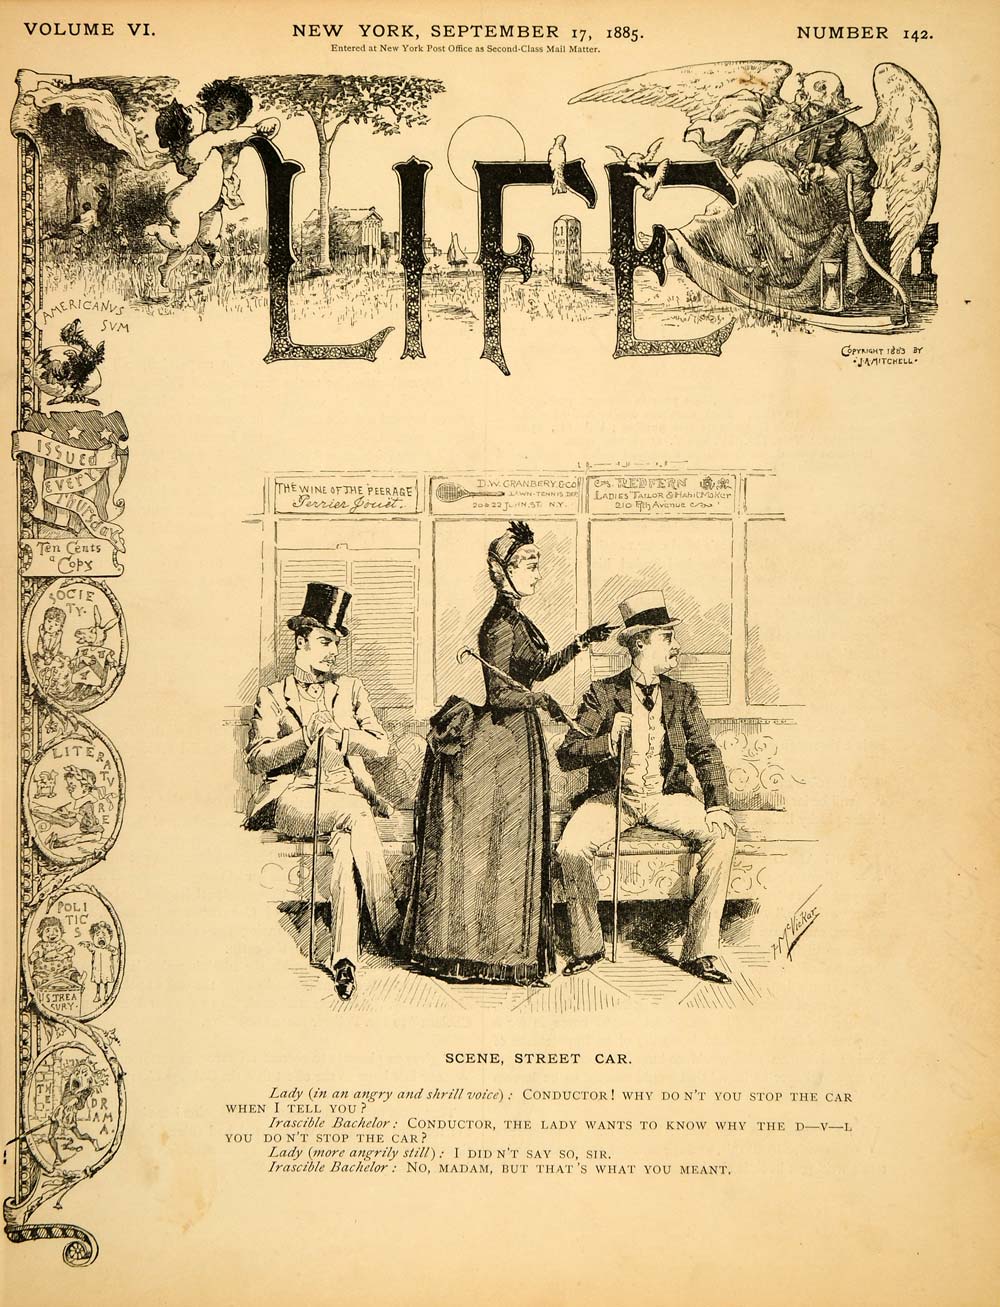 1885 Cover LIFE Street Car Conductor Lady Bachelor Stop - ORIGINAL LF2